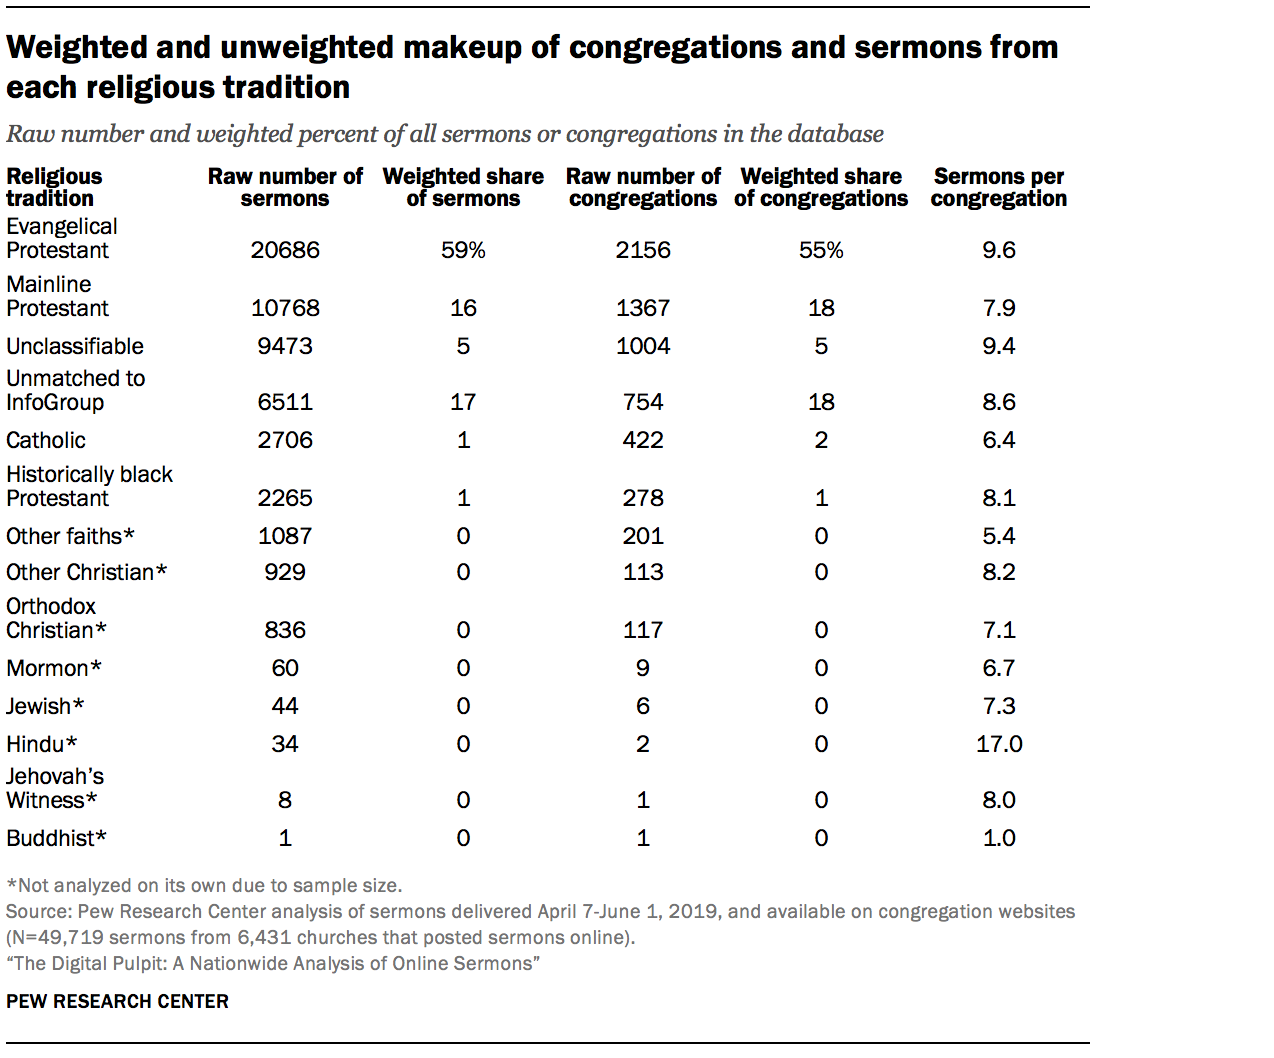 Weighted and unweighted makeup of congregations and sermons from each religious tradition